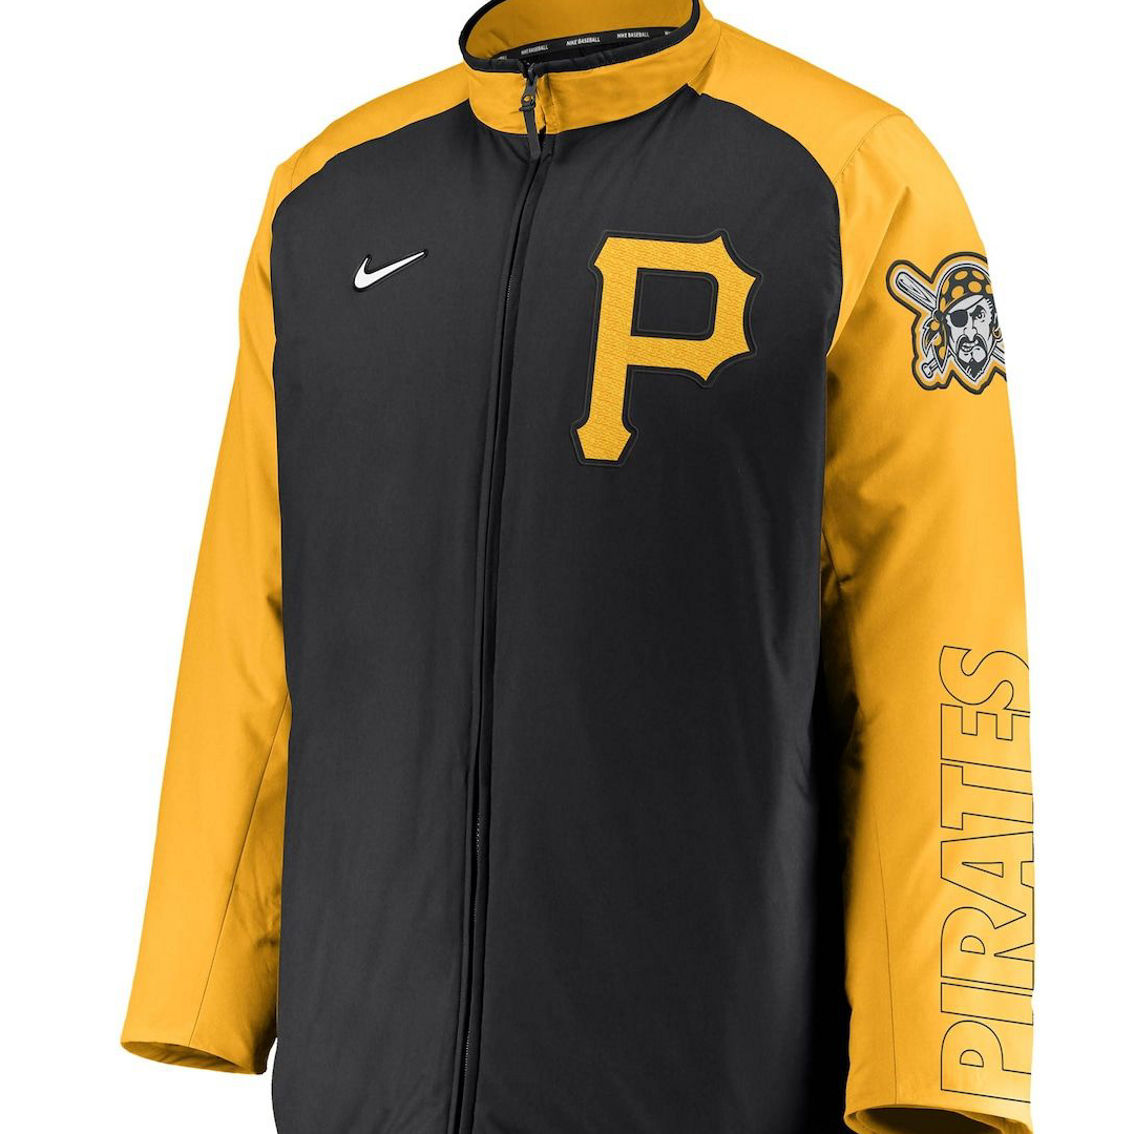 Nike Men's Black Pittsburgh Pirates Authentic Collection Dugout Full-Zip Jacket - Image 3 of 4